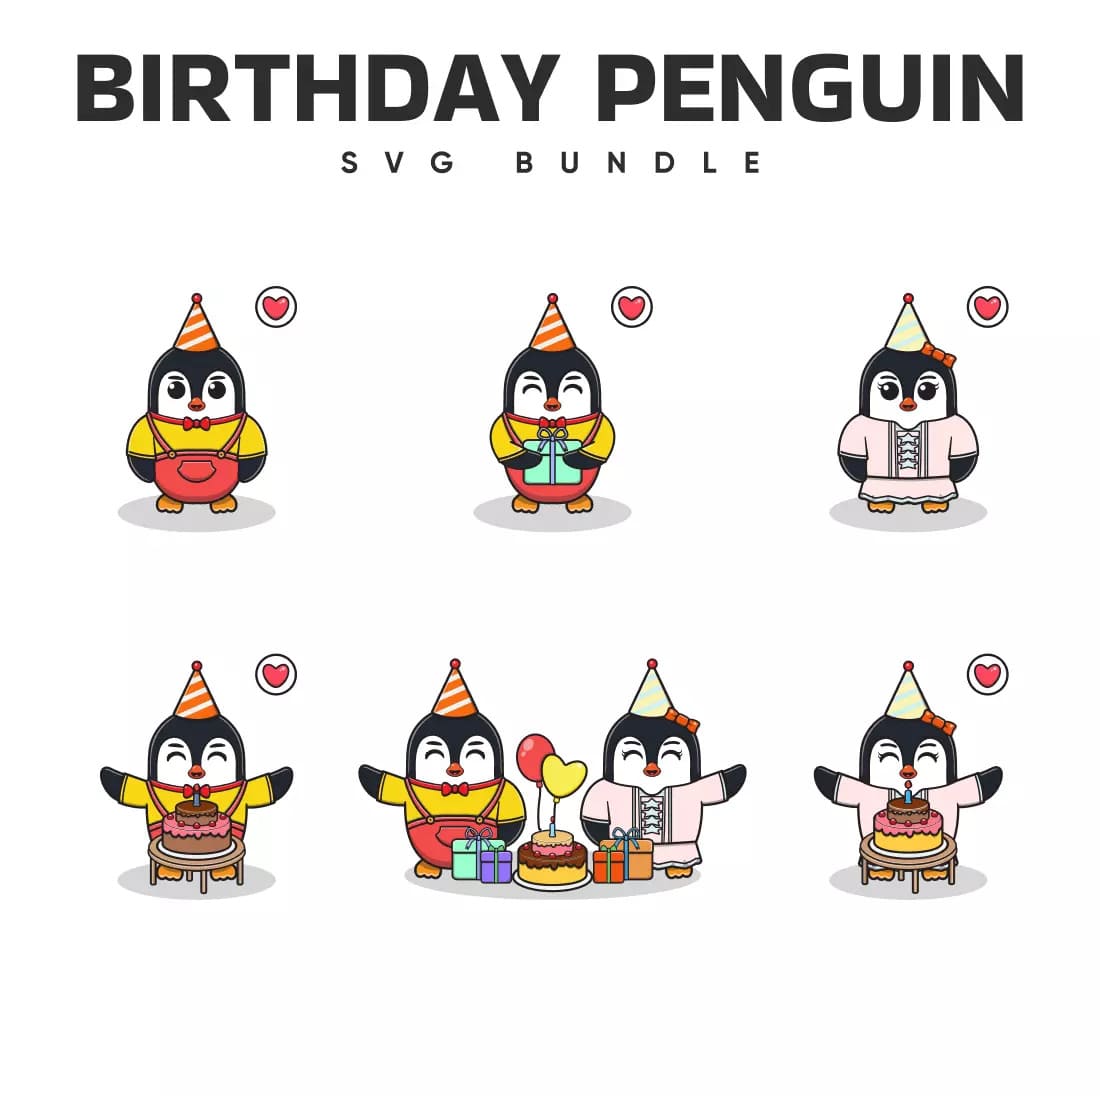 Bunch of penguins with birthday hats on.